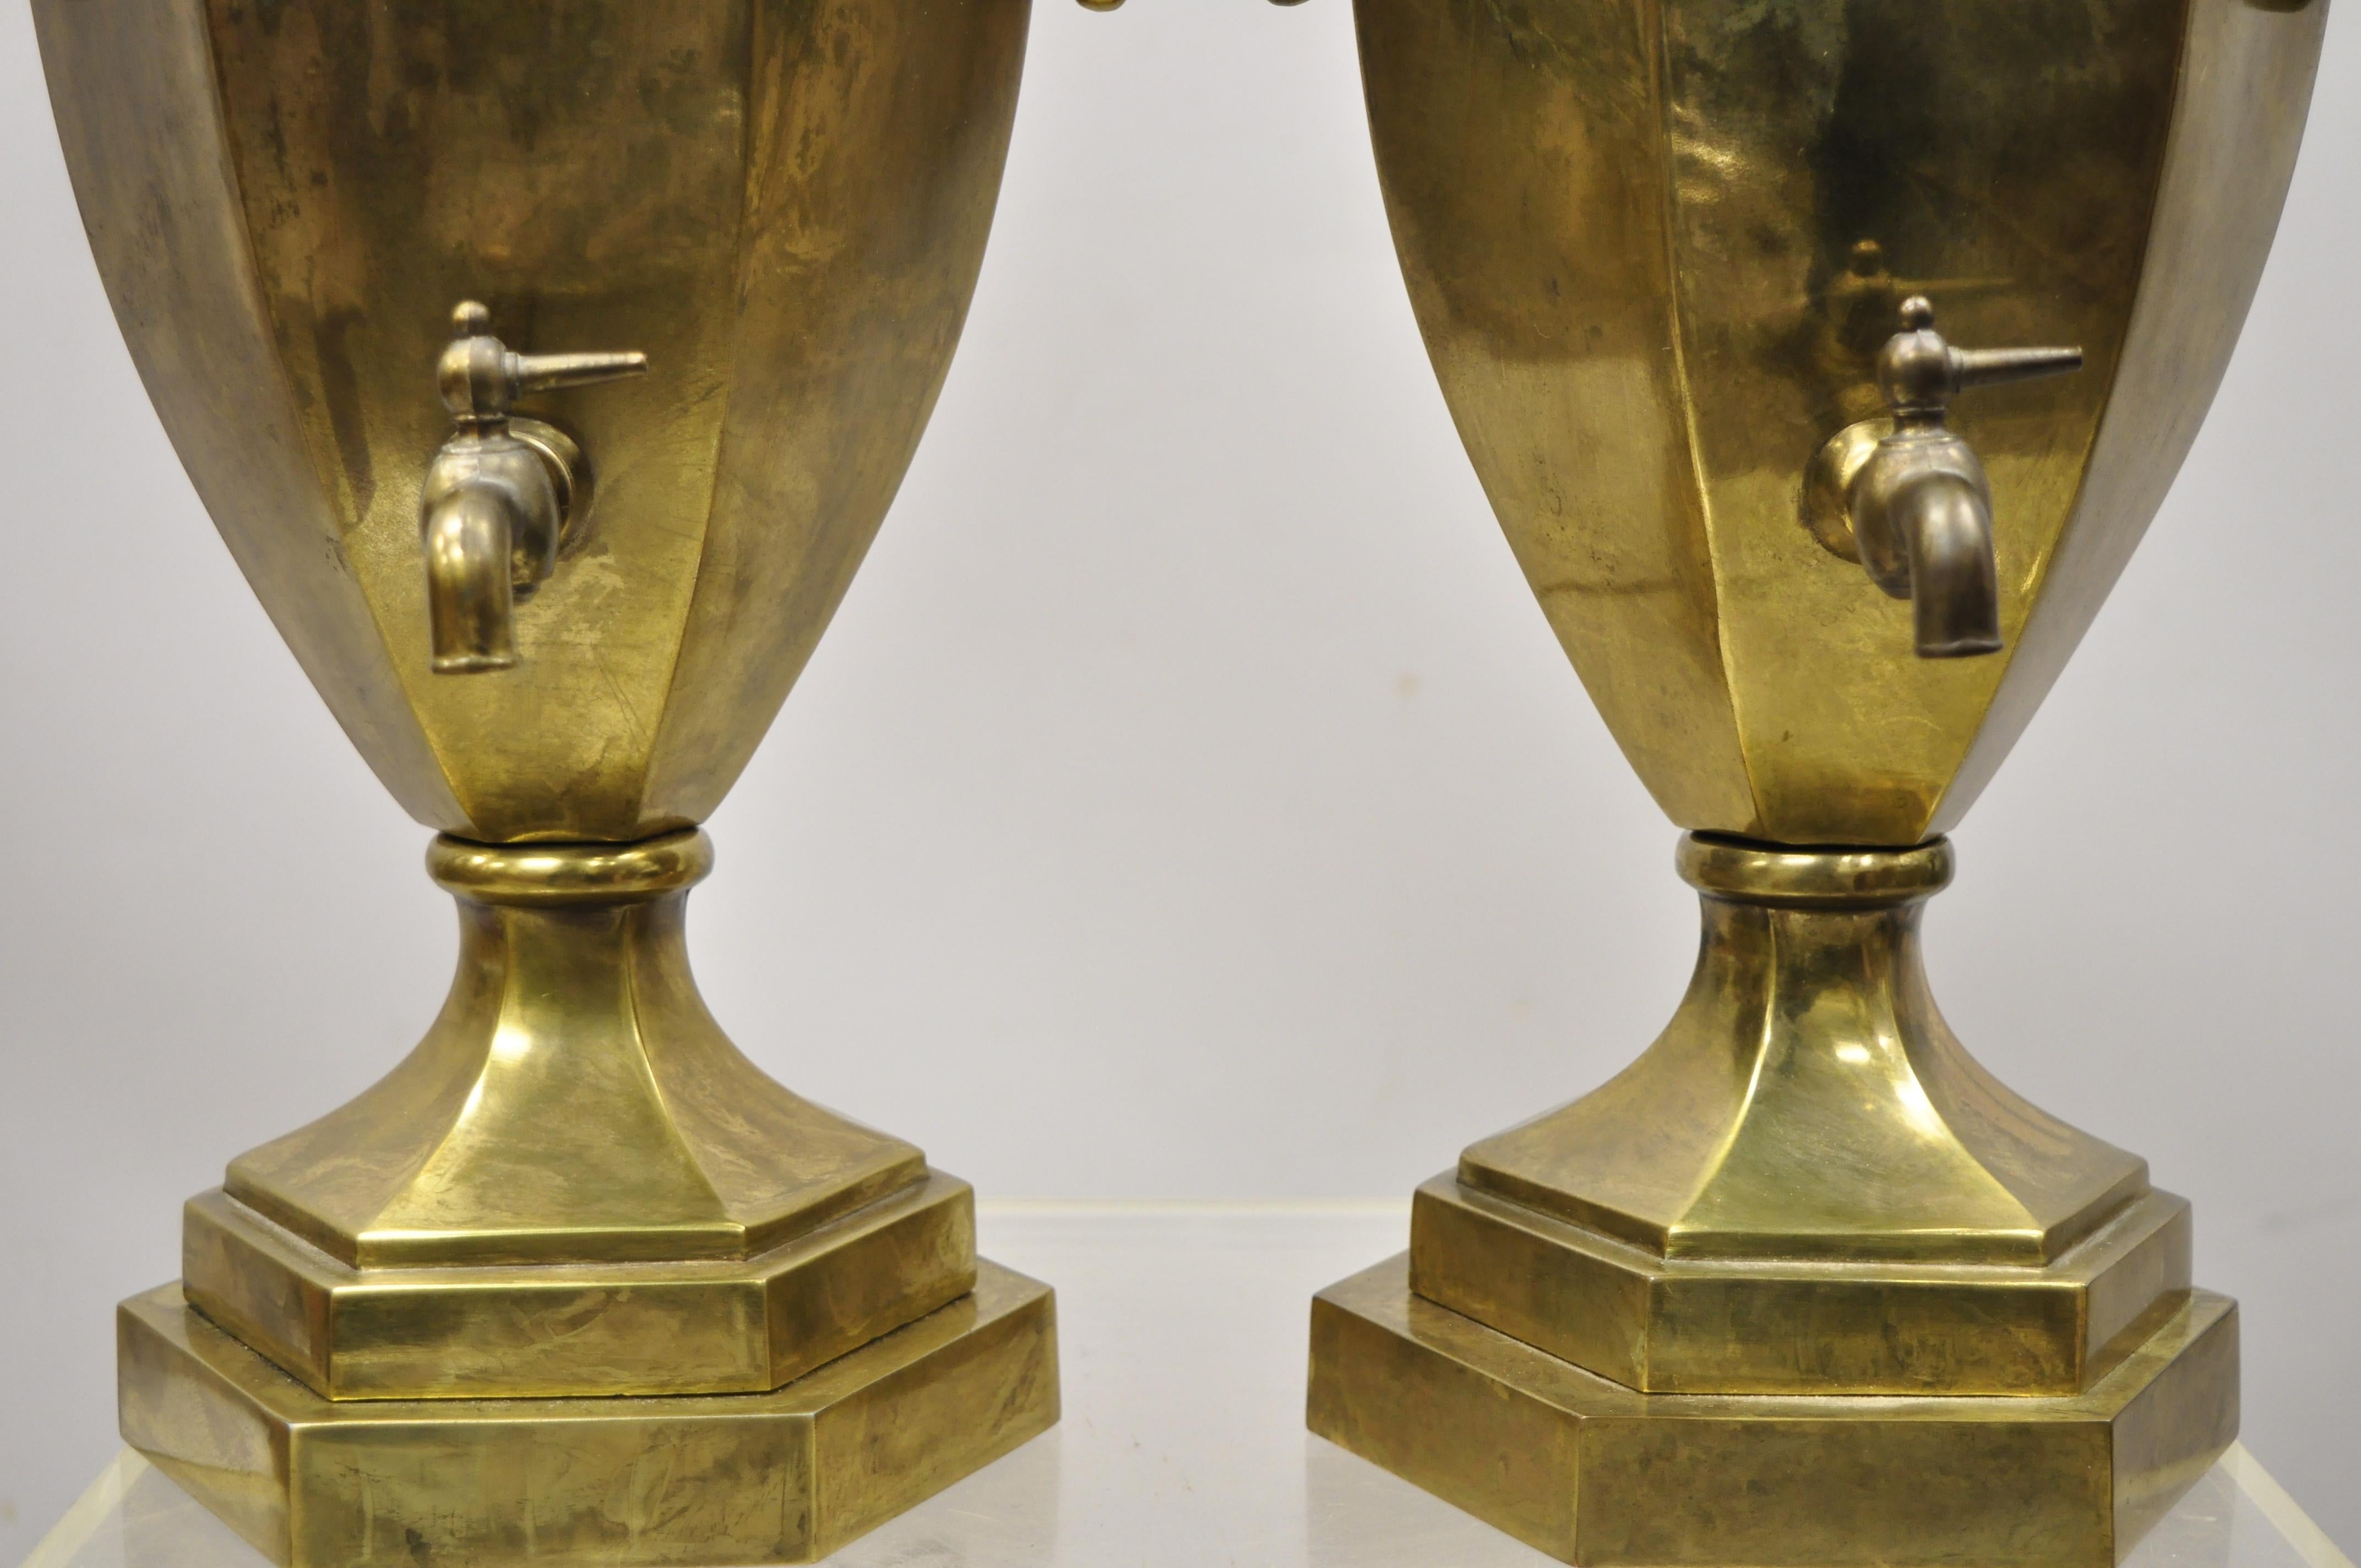 Paul Hanson Burnished Brass Samovar Urn Form Table Lamps with Shades - a Pair For Sale 5